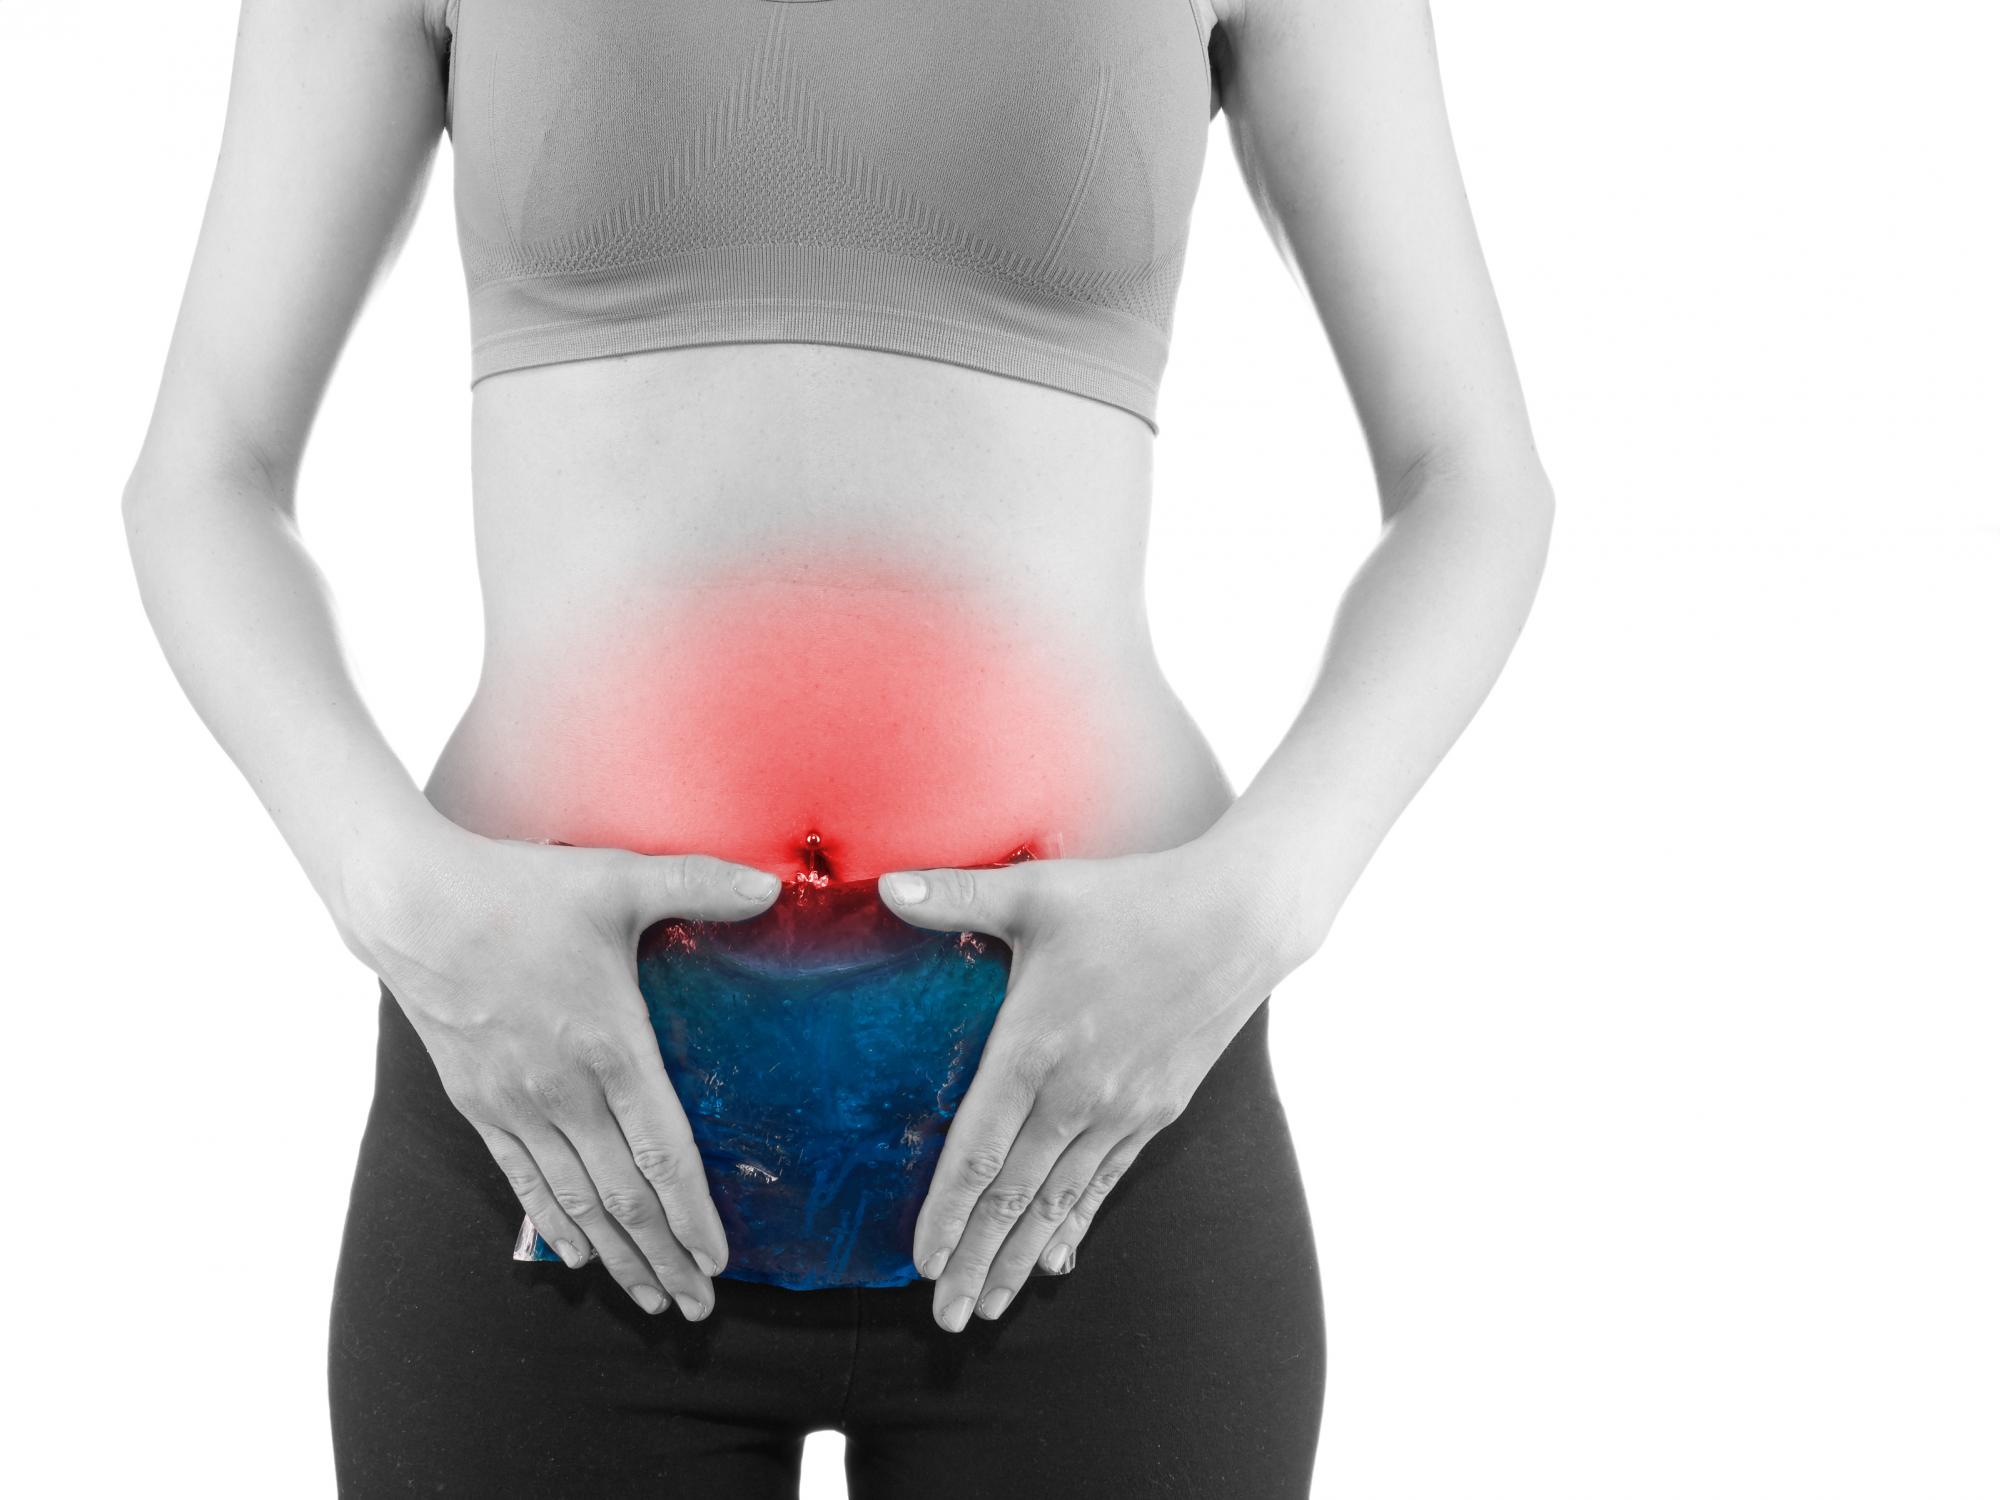 Pelvic Floor Physical Therapy can treat your chronic endometriosis pain.